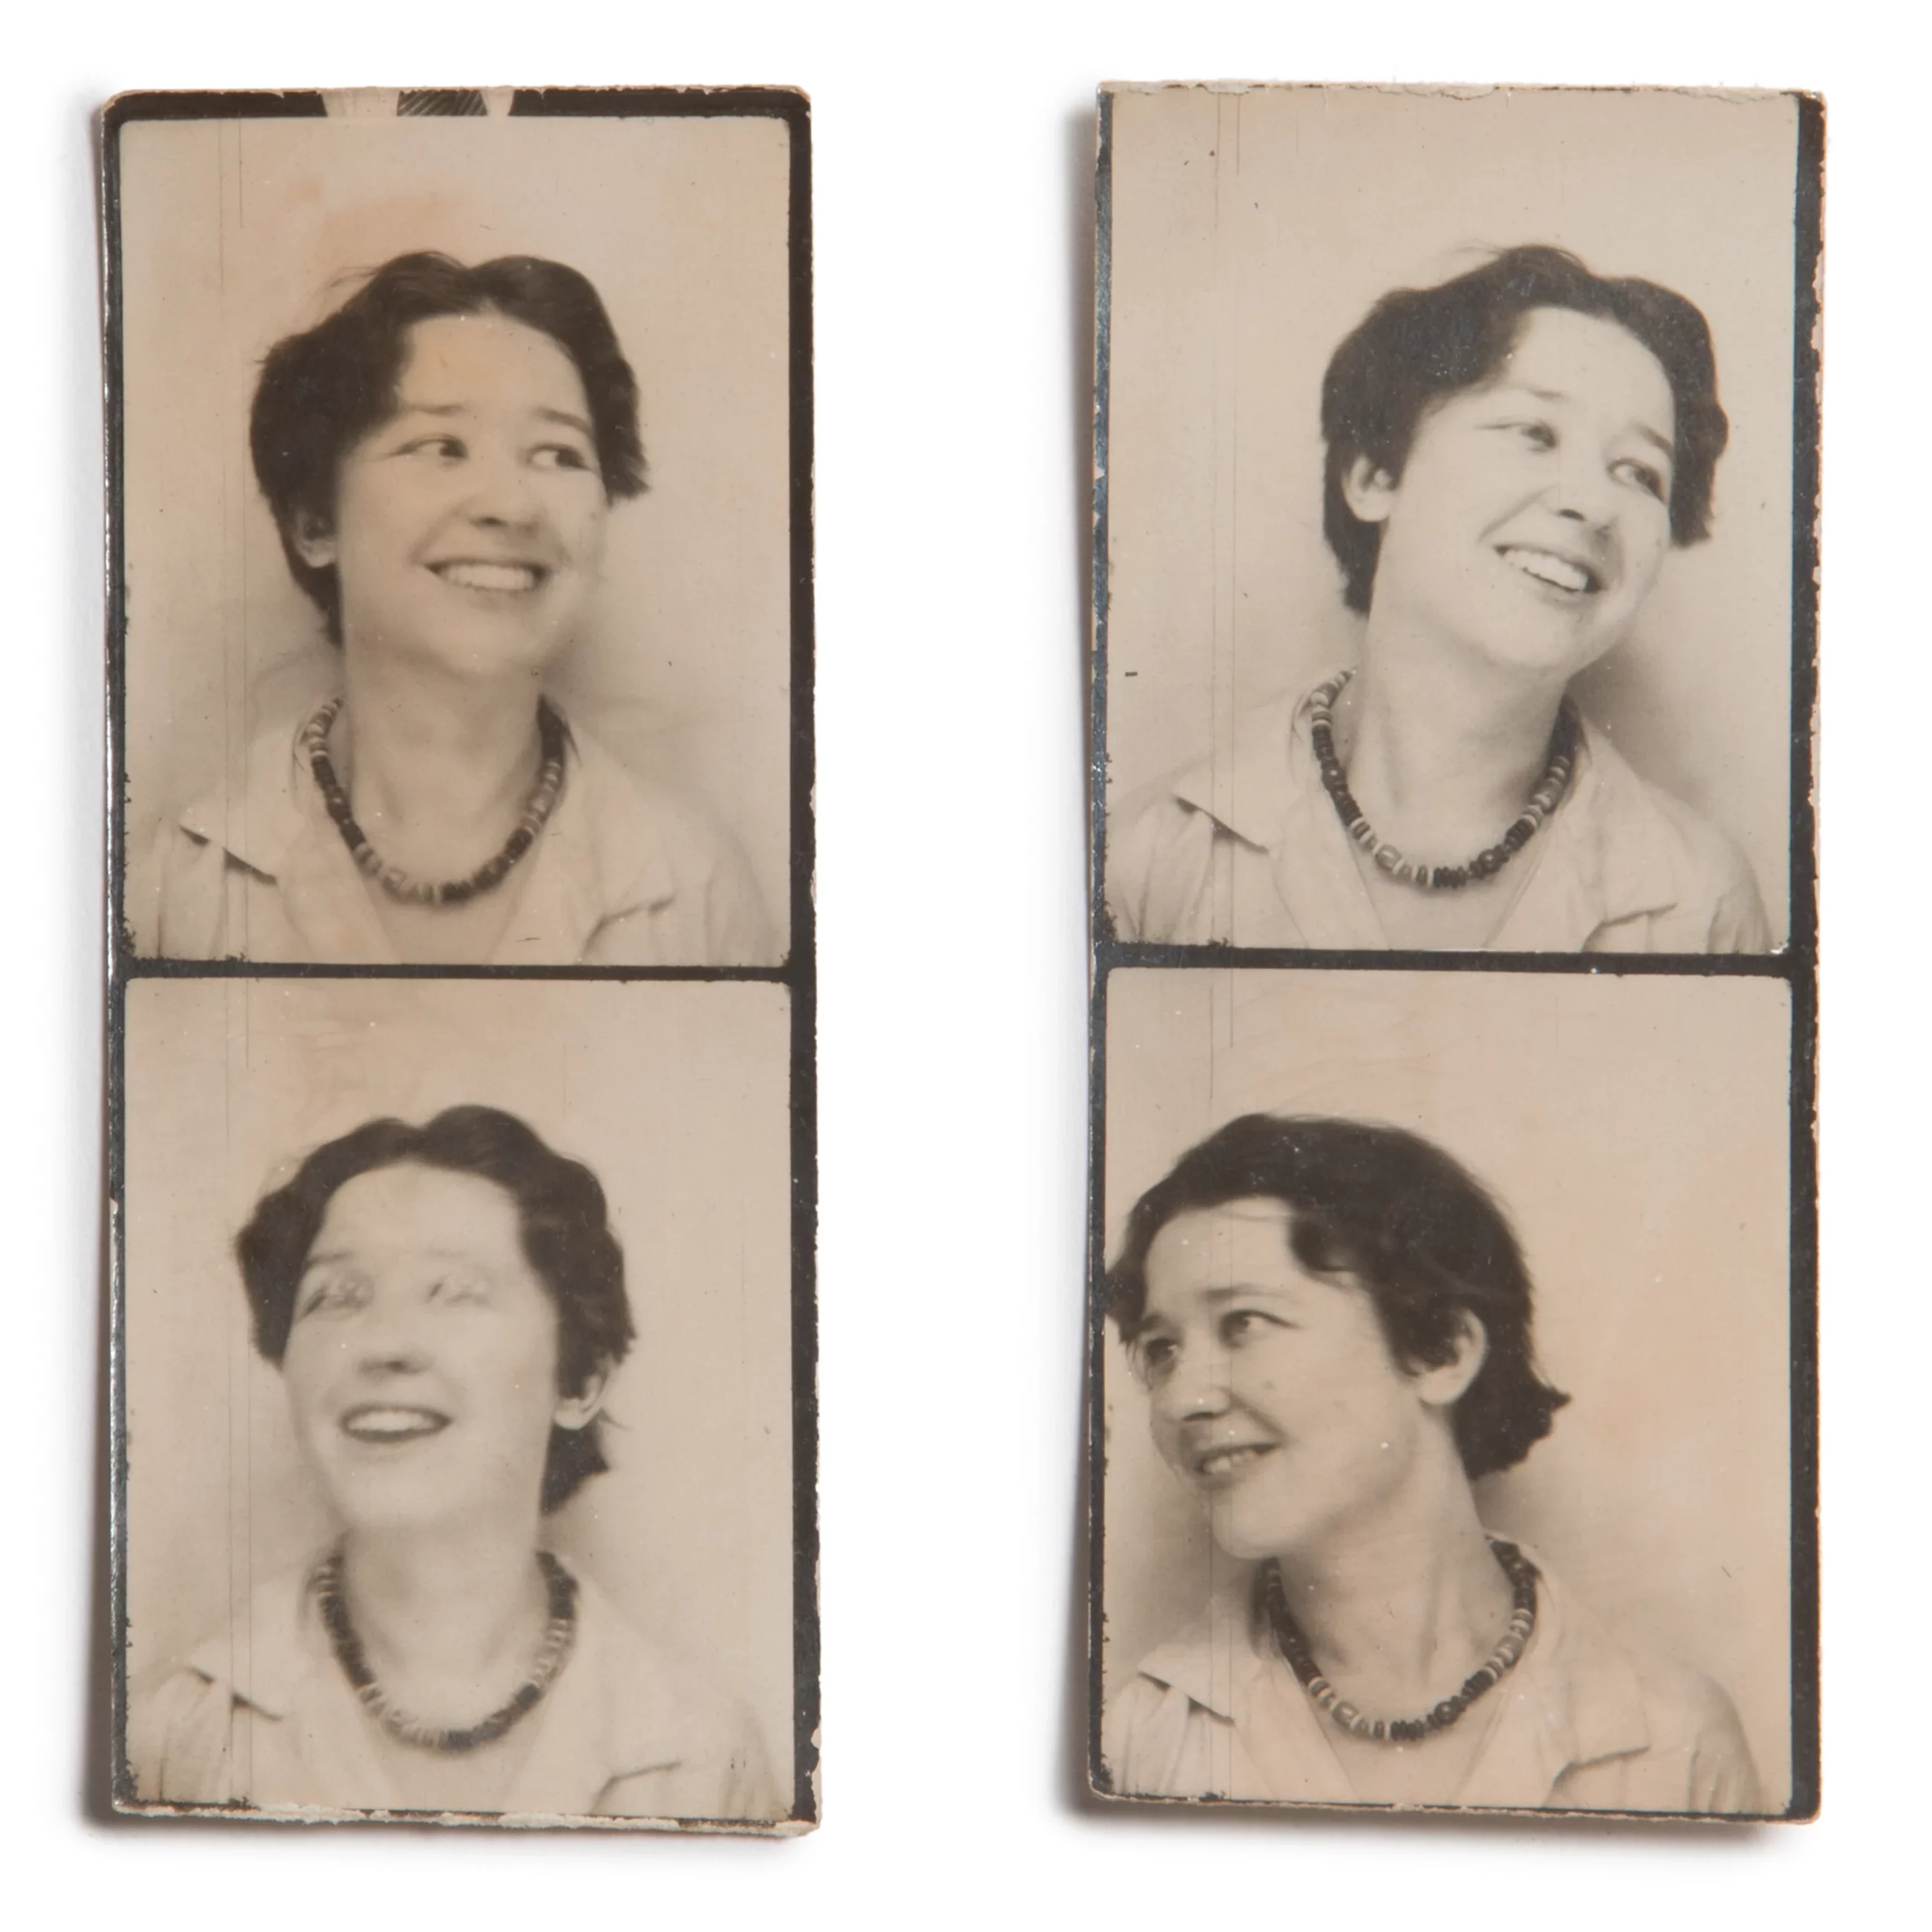 Two strips of 2 photo booth photos from the 1930s, of a young woman with a light skin tone and dark hair with a short haircut smiling in each photo.